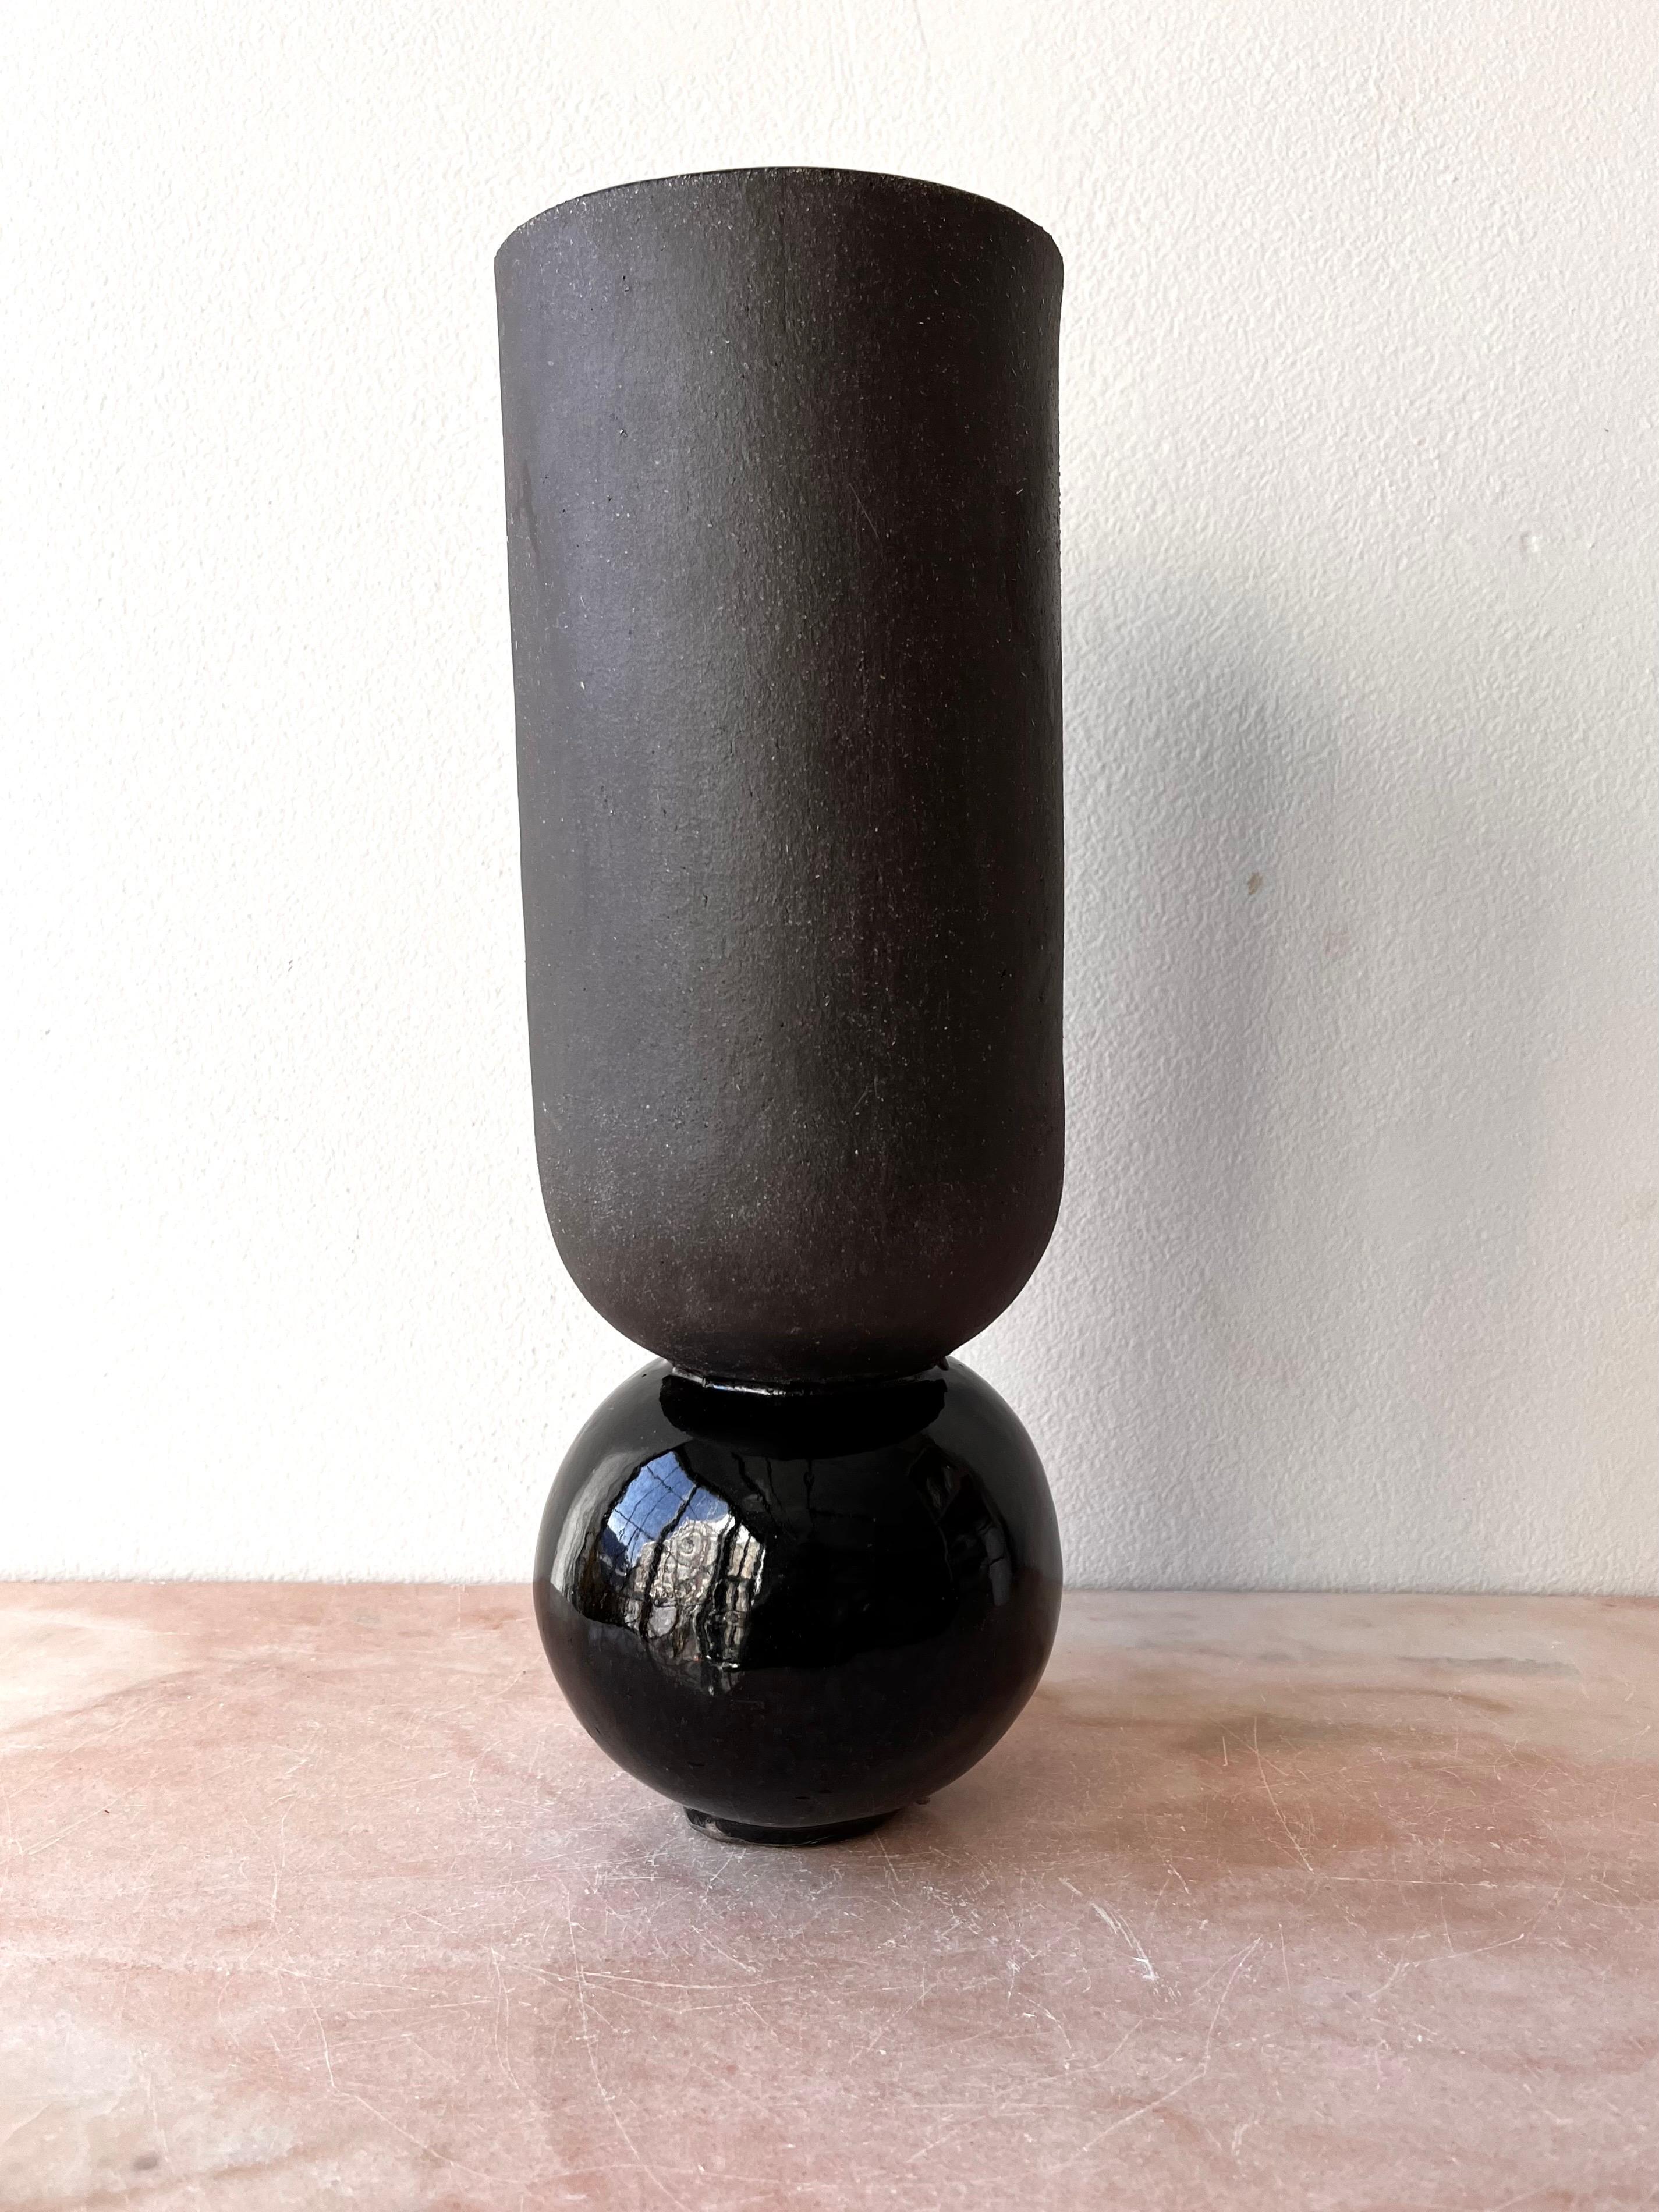 Slab-constructed vase, made with black stoneware which is glazed inside and on the base and unglazed on the main exterior for a matte-gloss contrast. It is open through to the bottom inside, so water will fill the round base.